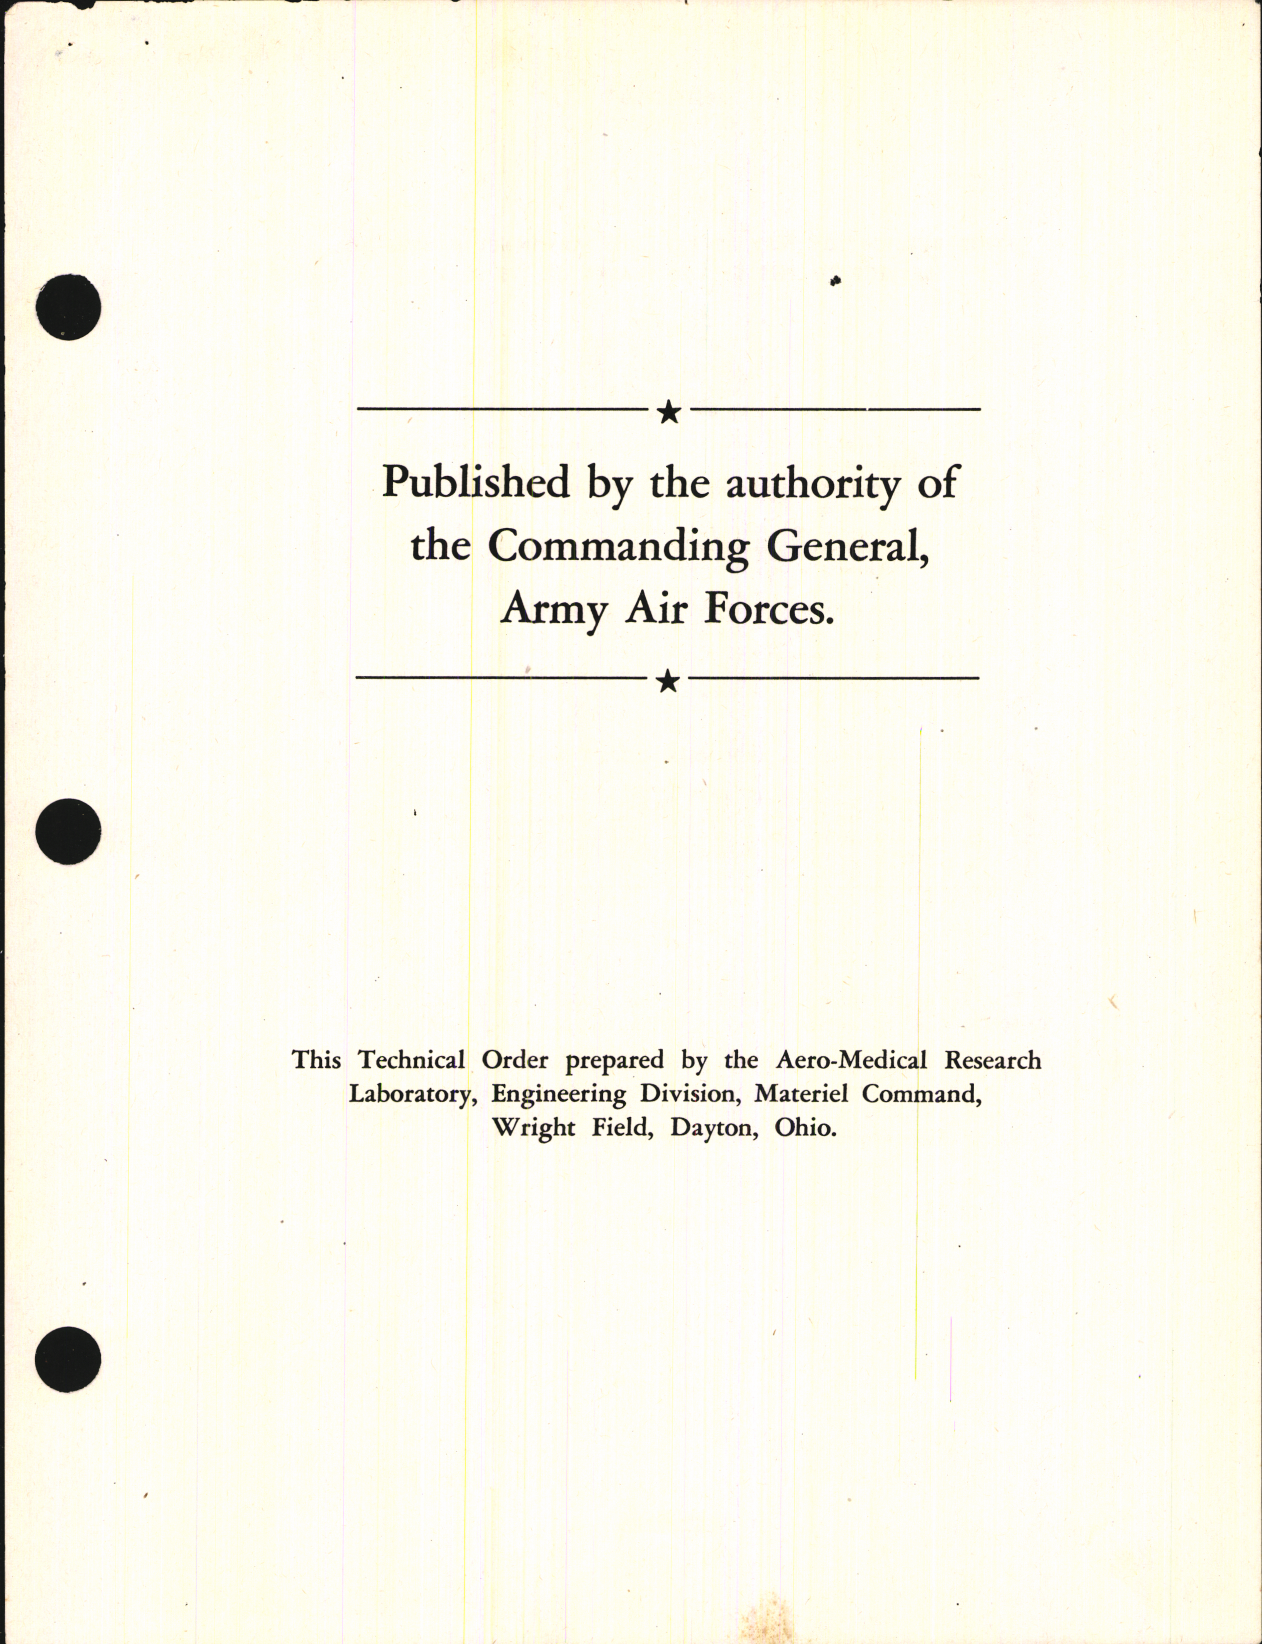 Sample page 3 from AirCorps Library document: Use of Oxygen and Oxygen Equipment